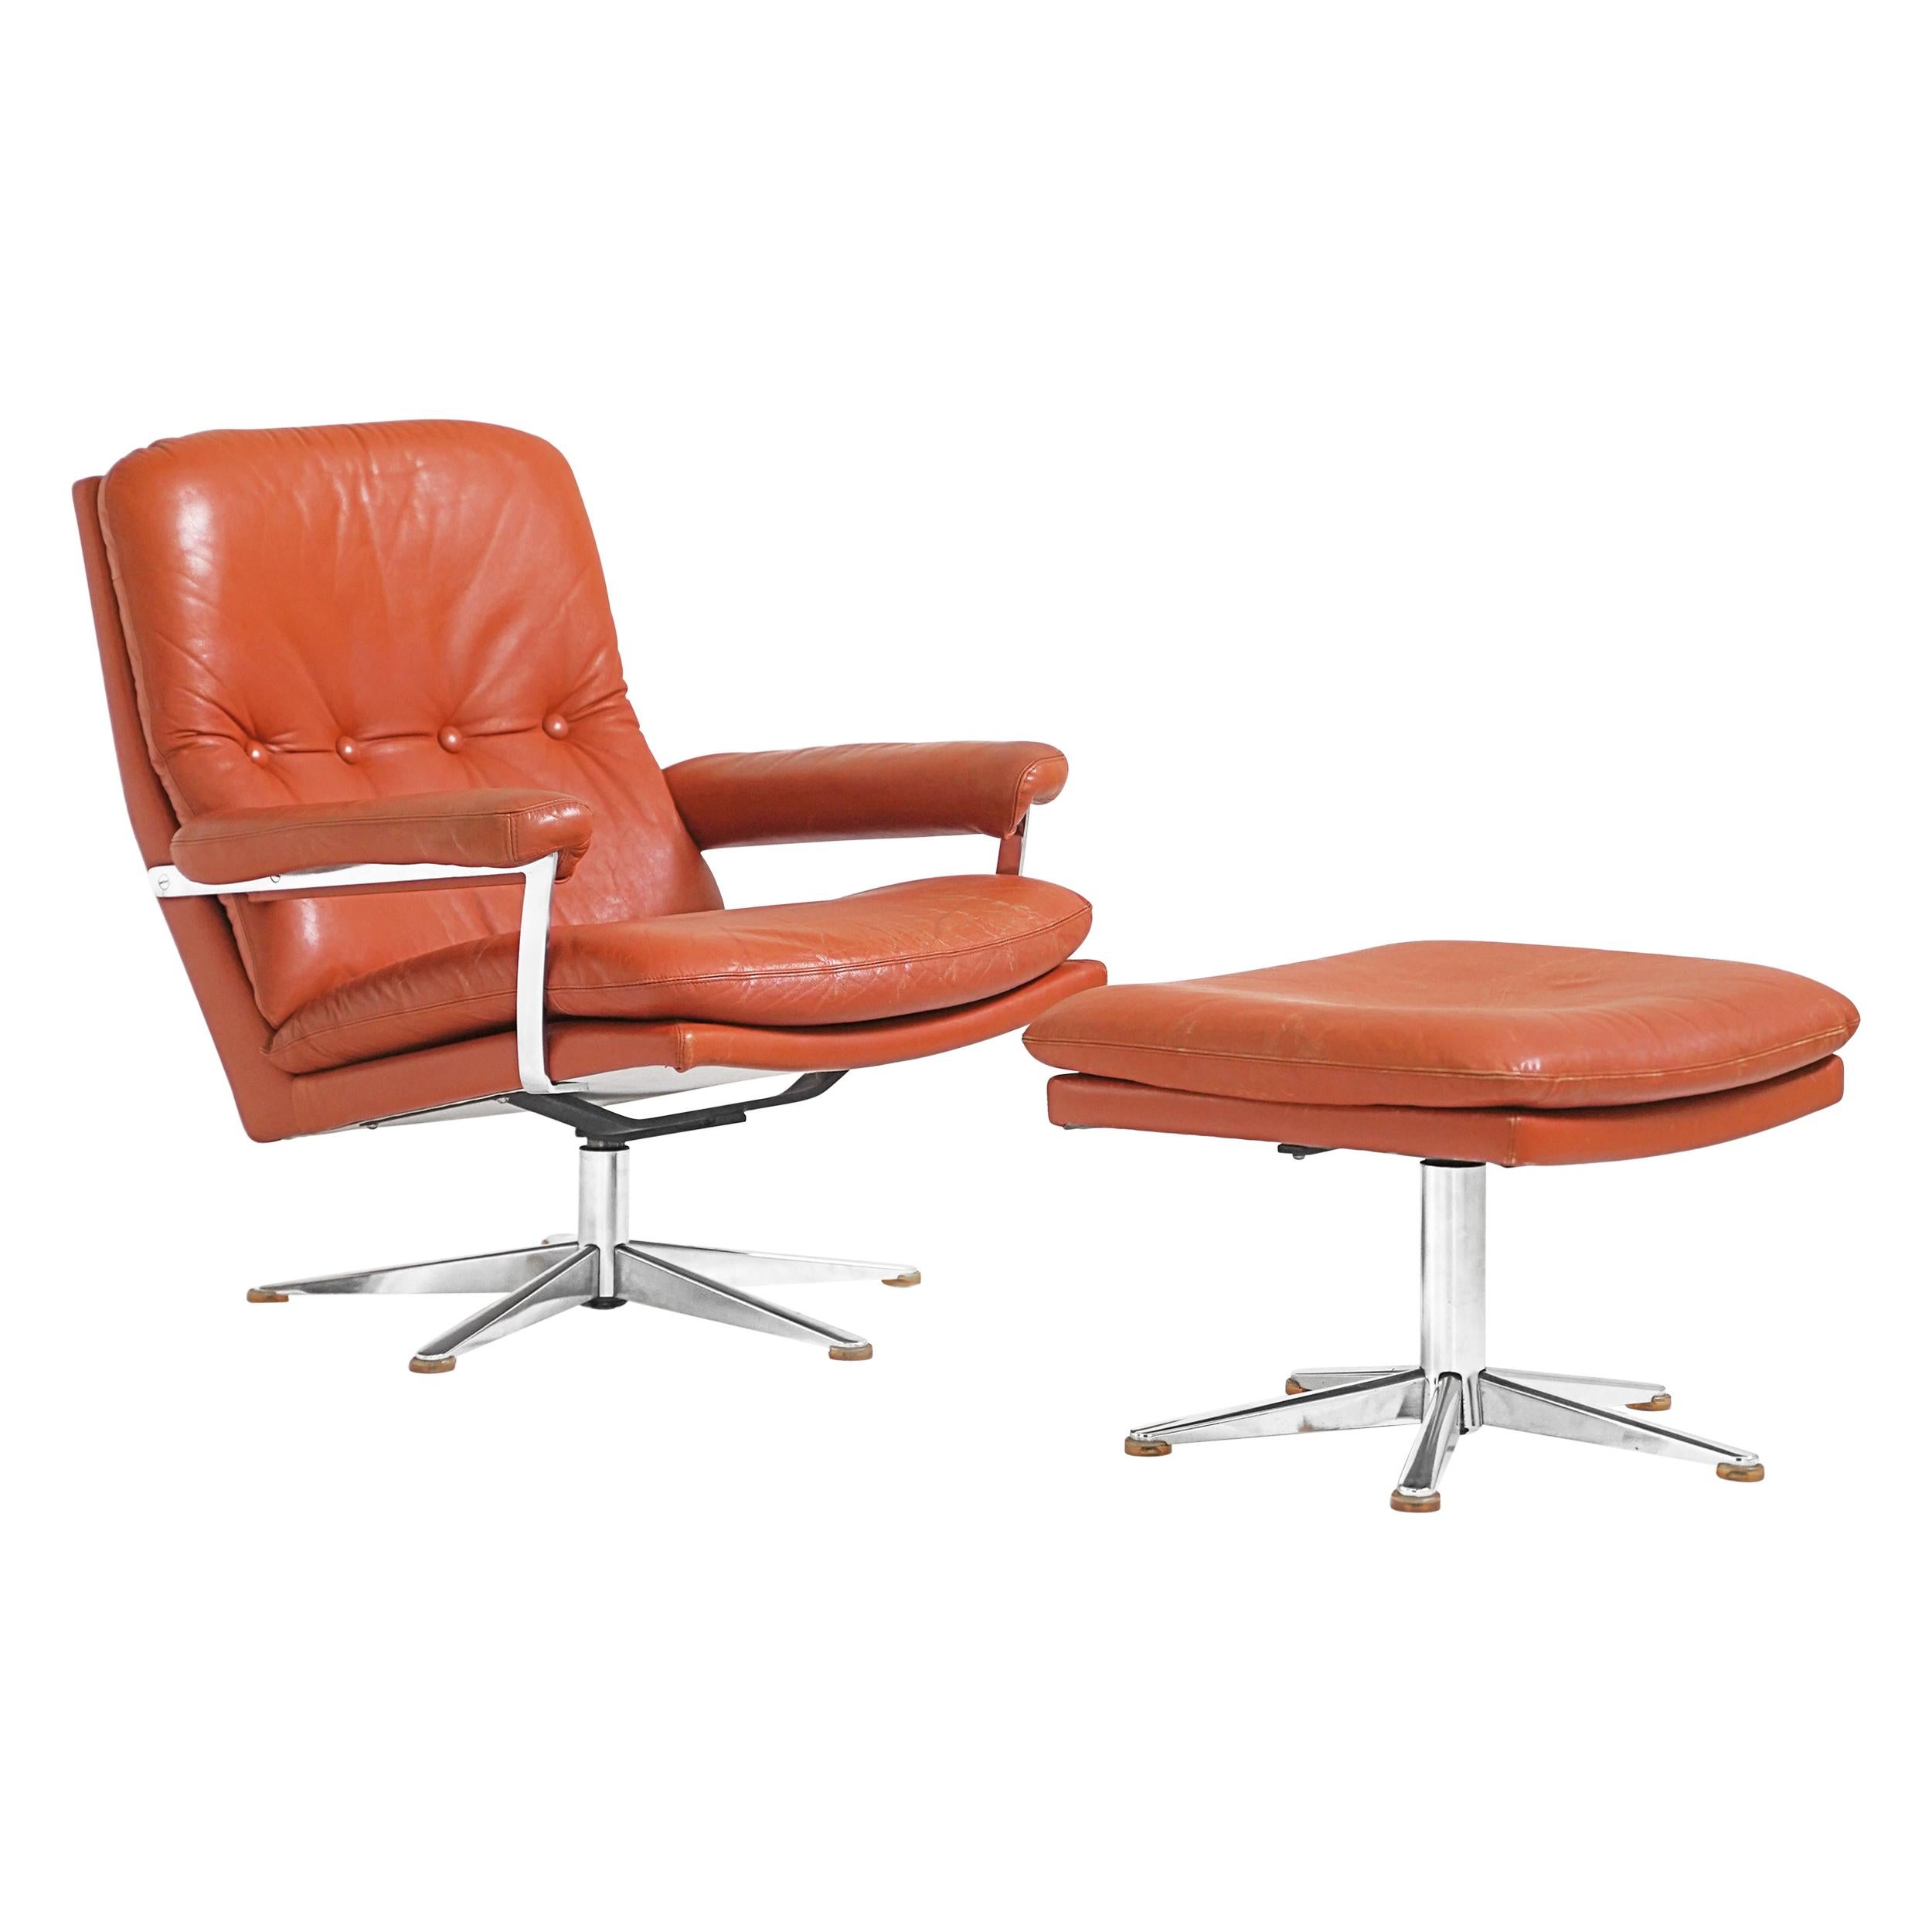 Palma Lounge Chair in Original Leather by Werner Langenfeld for ESA